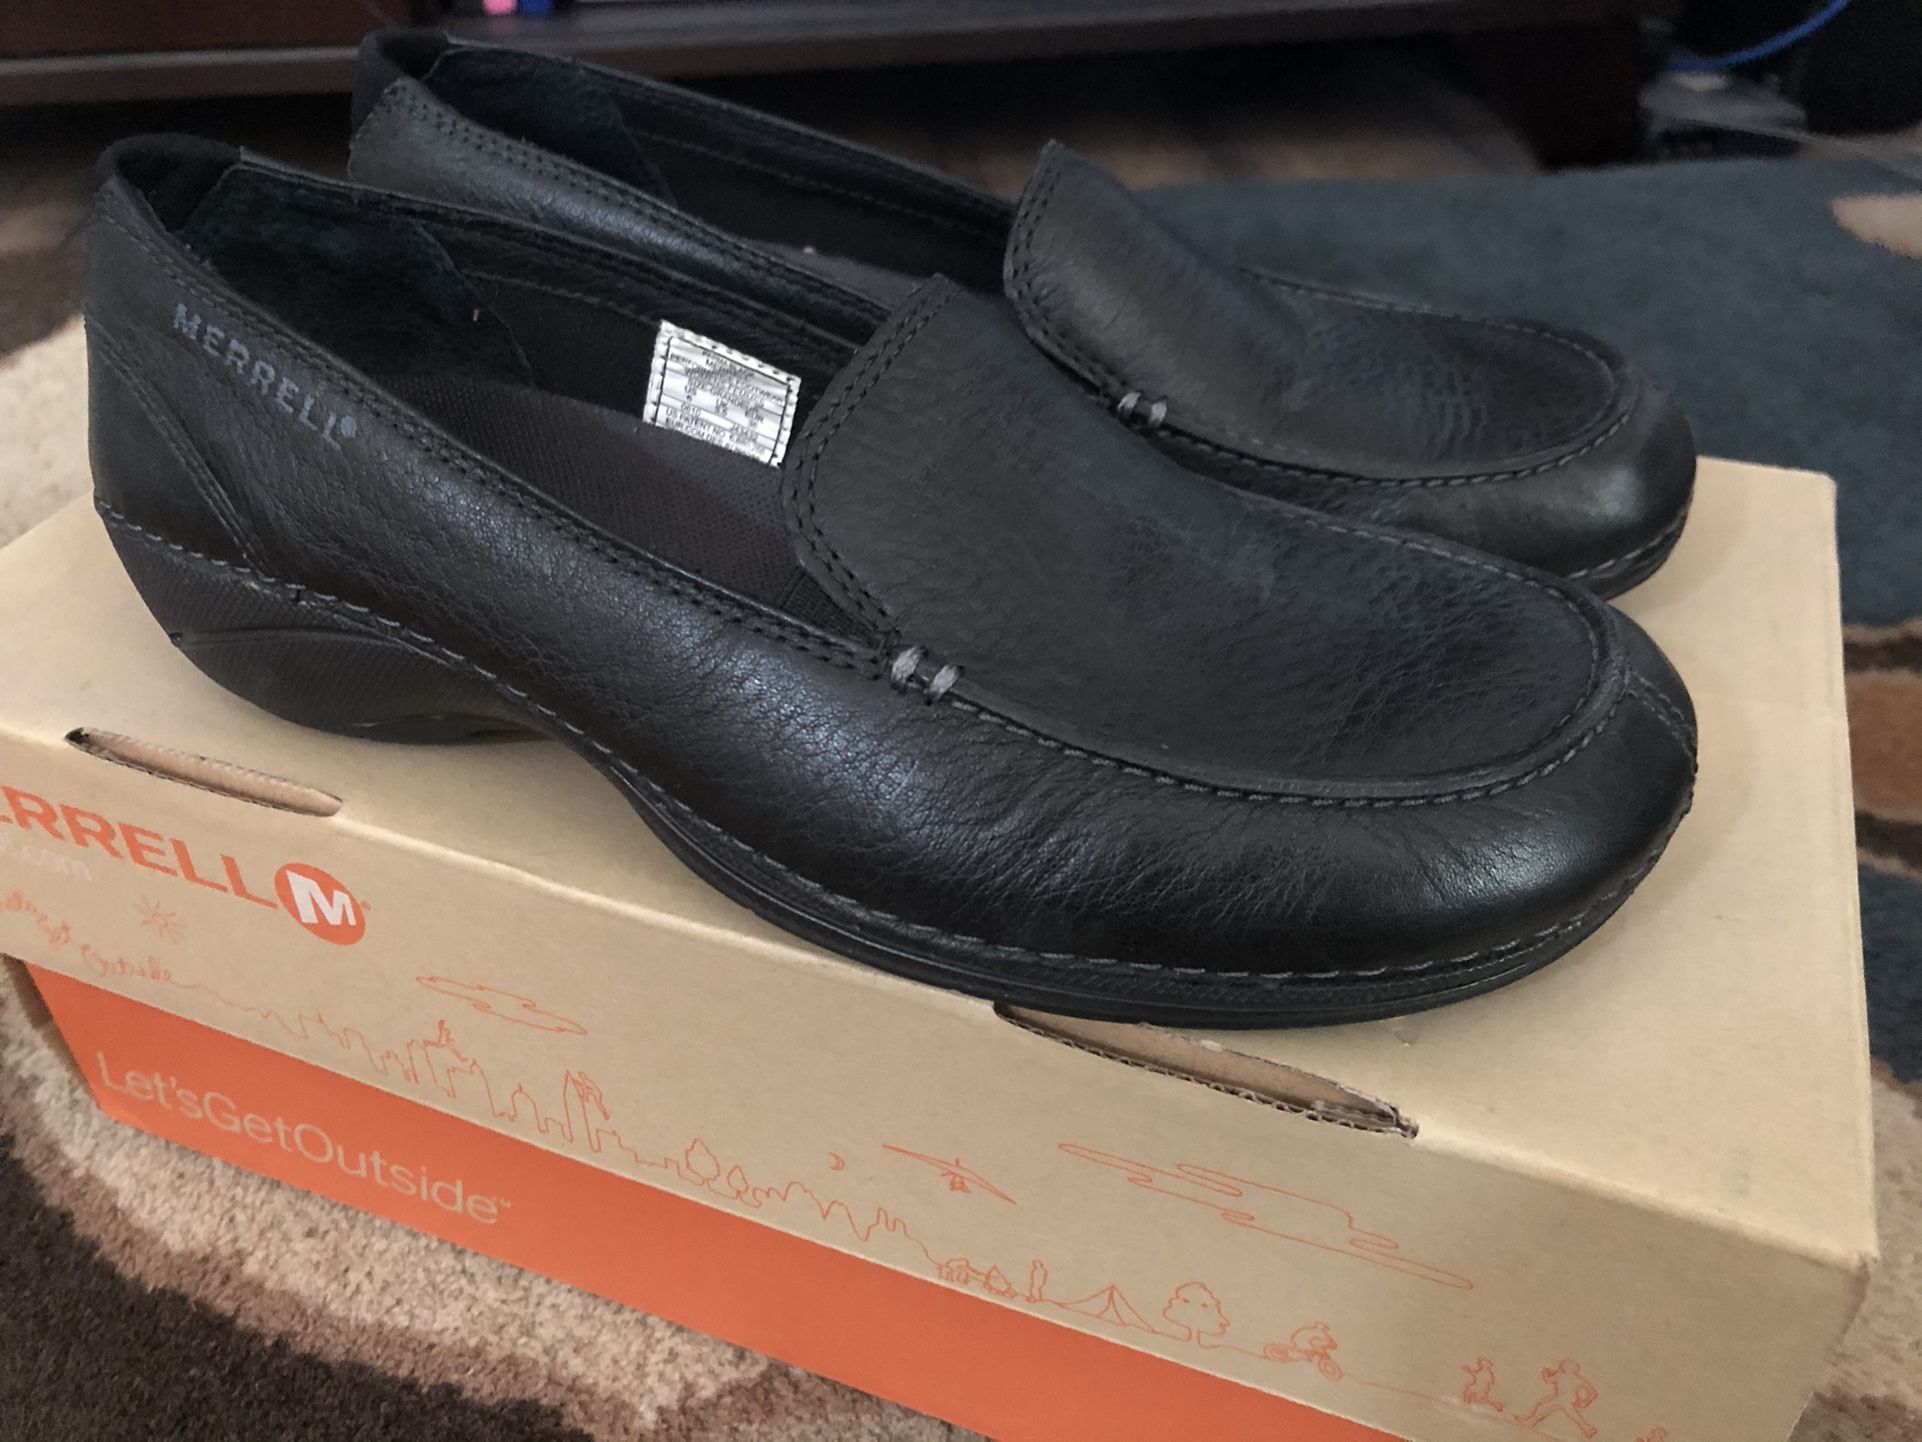 BRAND NEW Merrell Parma Shoes Size 6